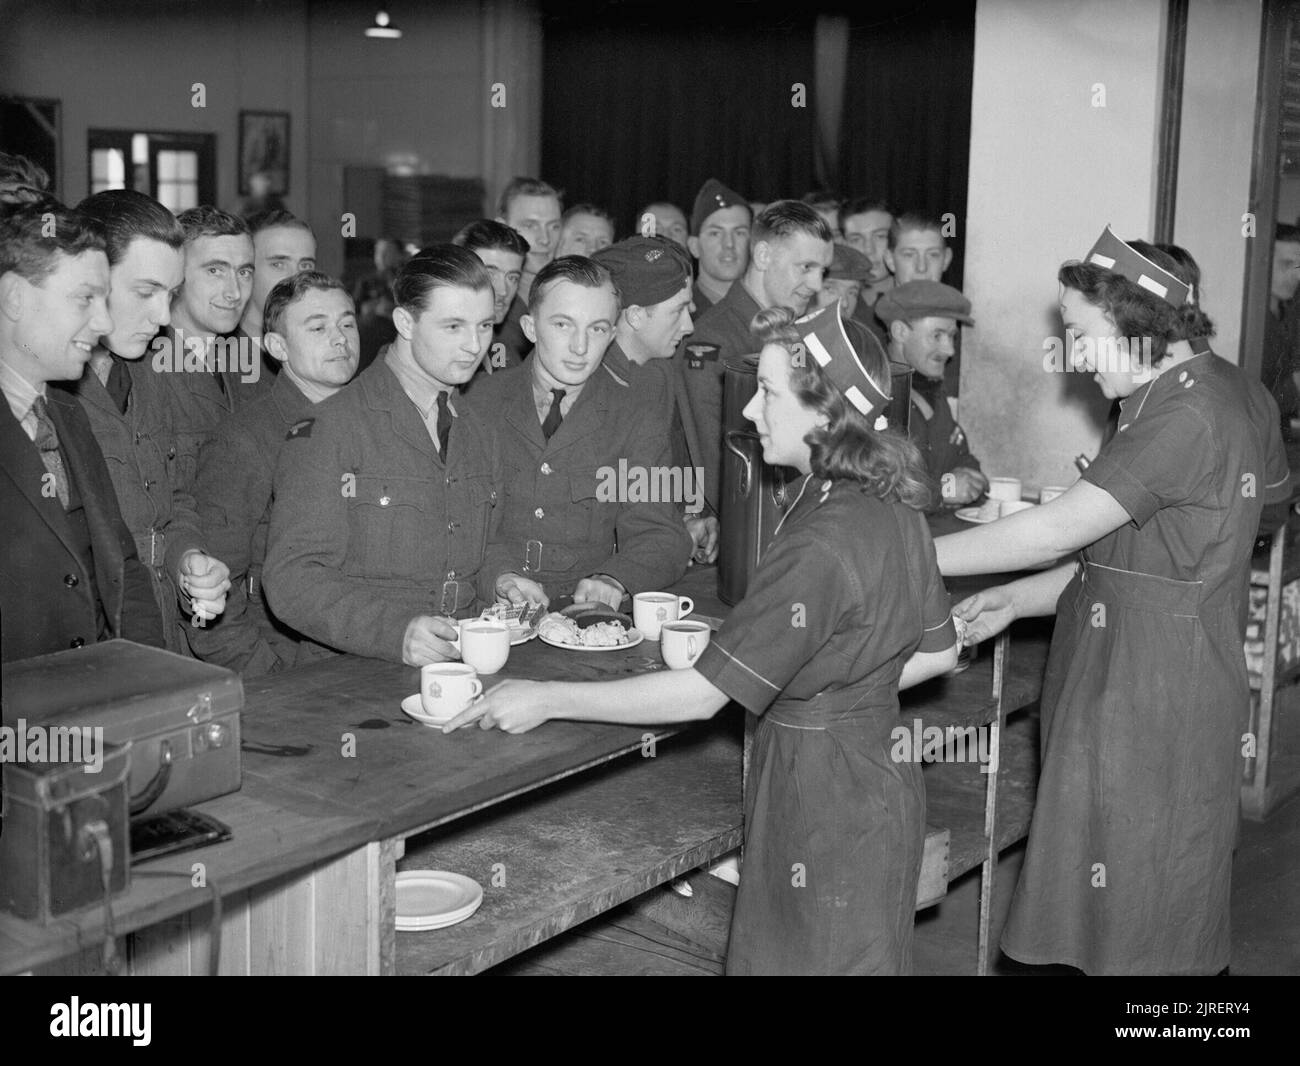 RAF personnel being served tea and refreshments in the NAAFI canteen at Oakington, Cambridgeshire, February 1941. Waitresses serving tea and refreshments to airmen in the NAAFI canteen at Oakington, Cambridgeshire. Stock Photo